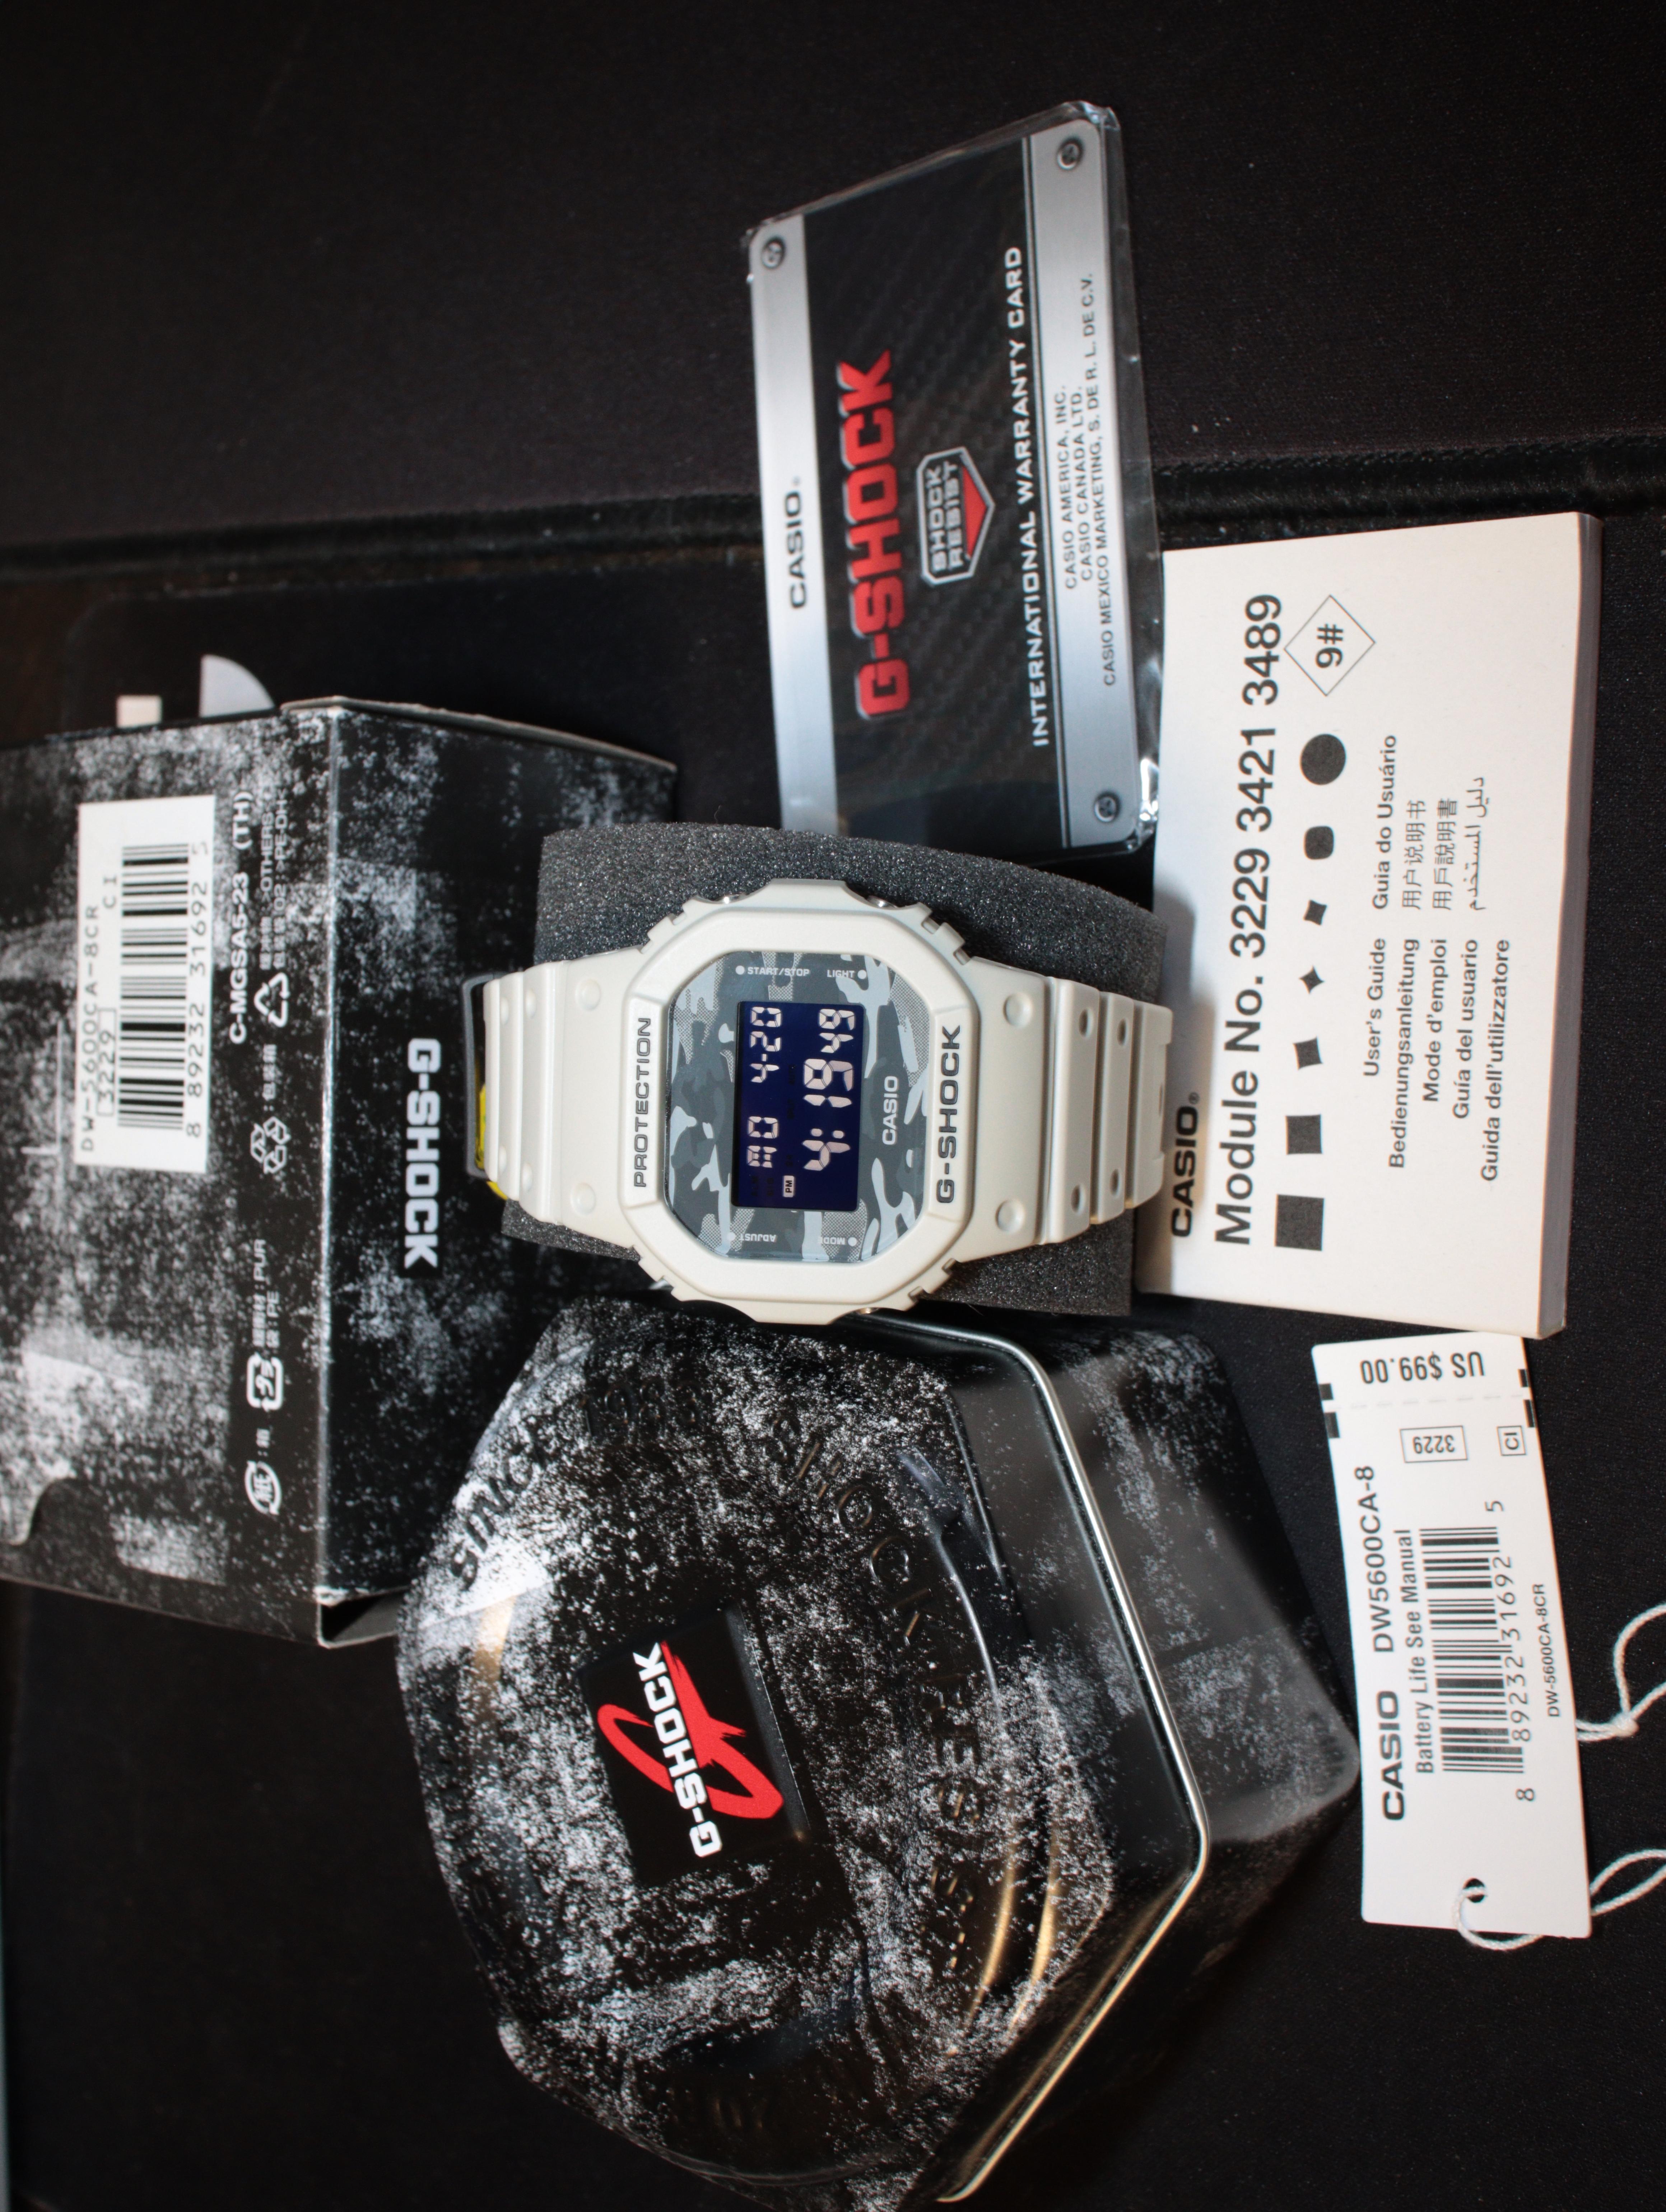 WTS] Casio G-Shock DW5600CA-8 price reduced | WatchCharts Marketplace